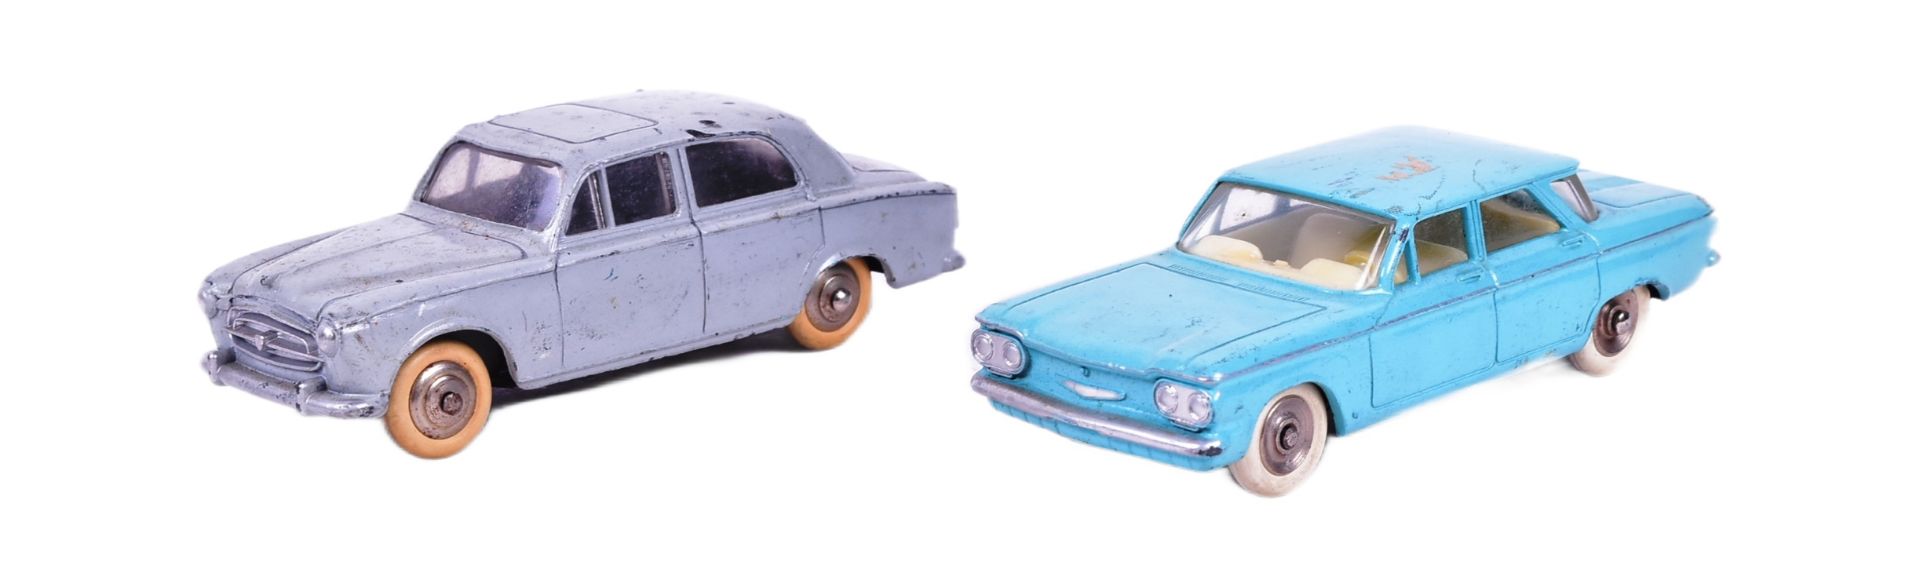 DIECAST - FRENCH DINKY TOYS - PEUGEOT 403 & CHEVROLET CORVAIR